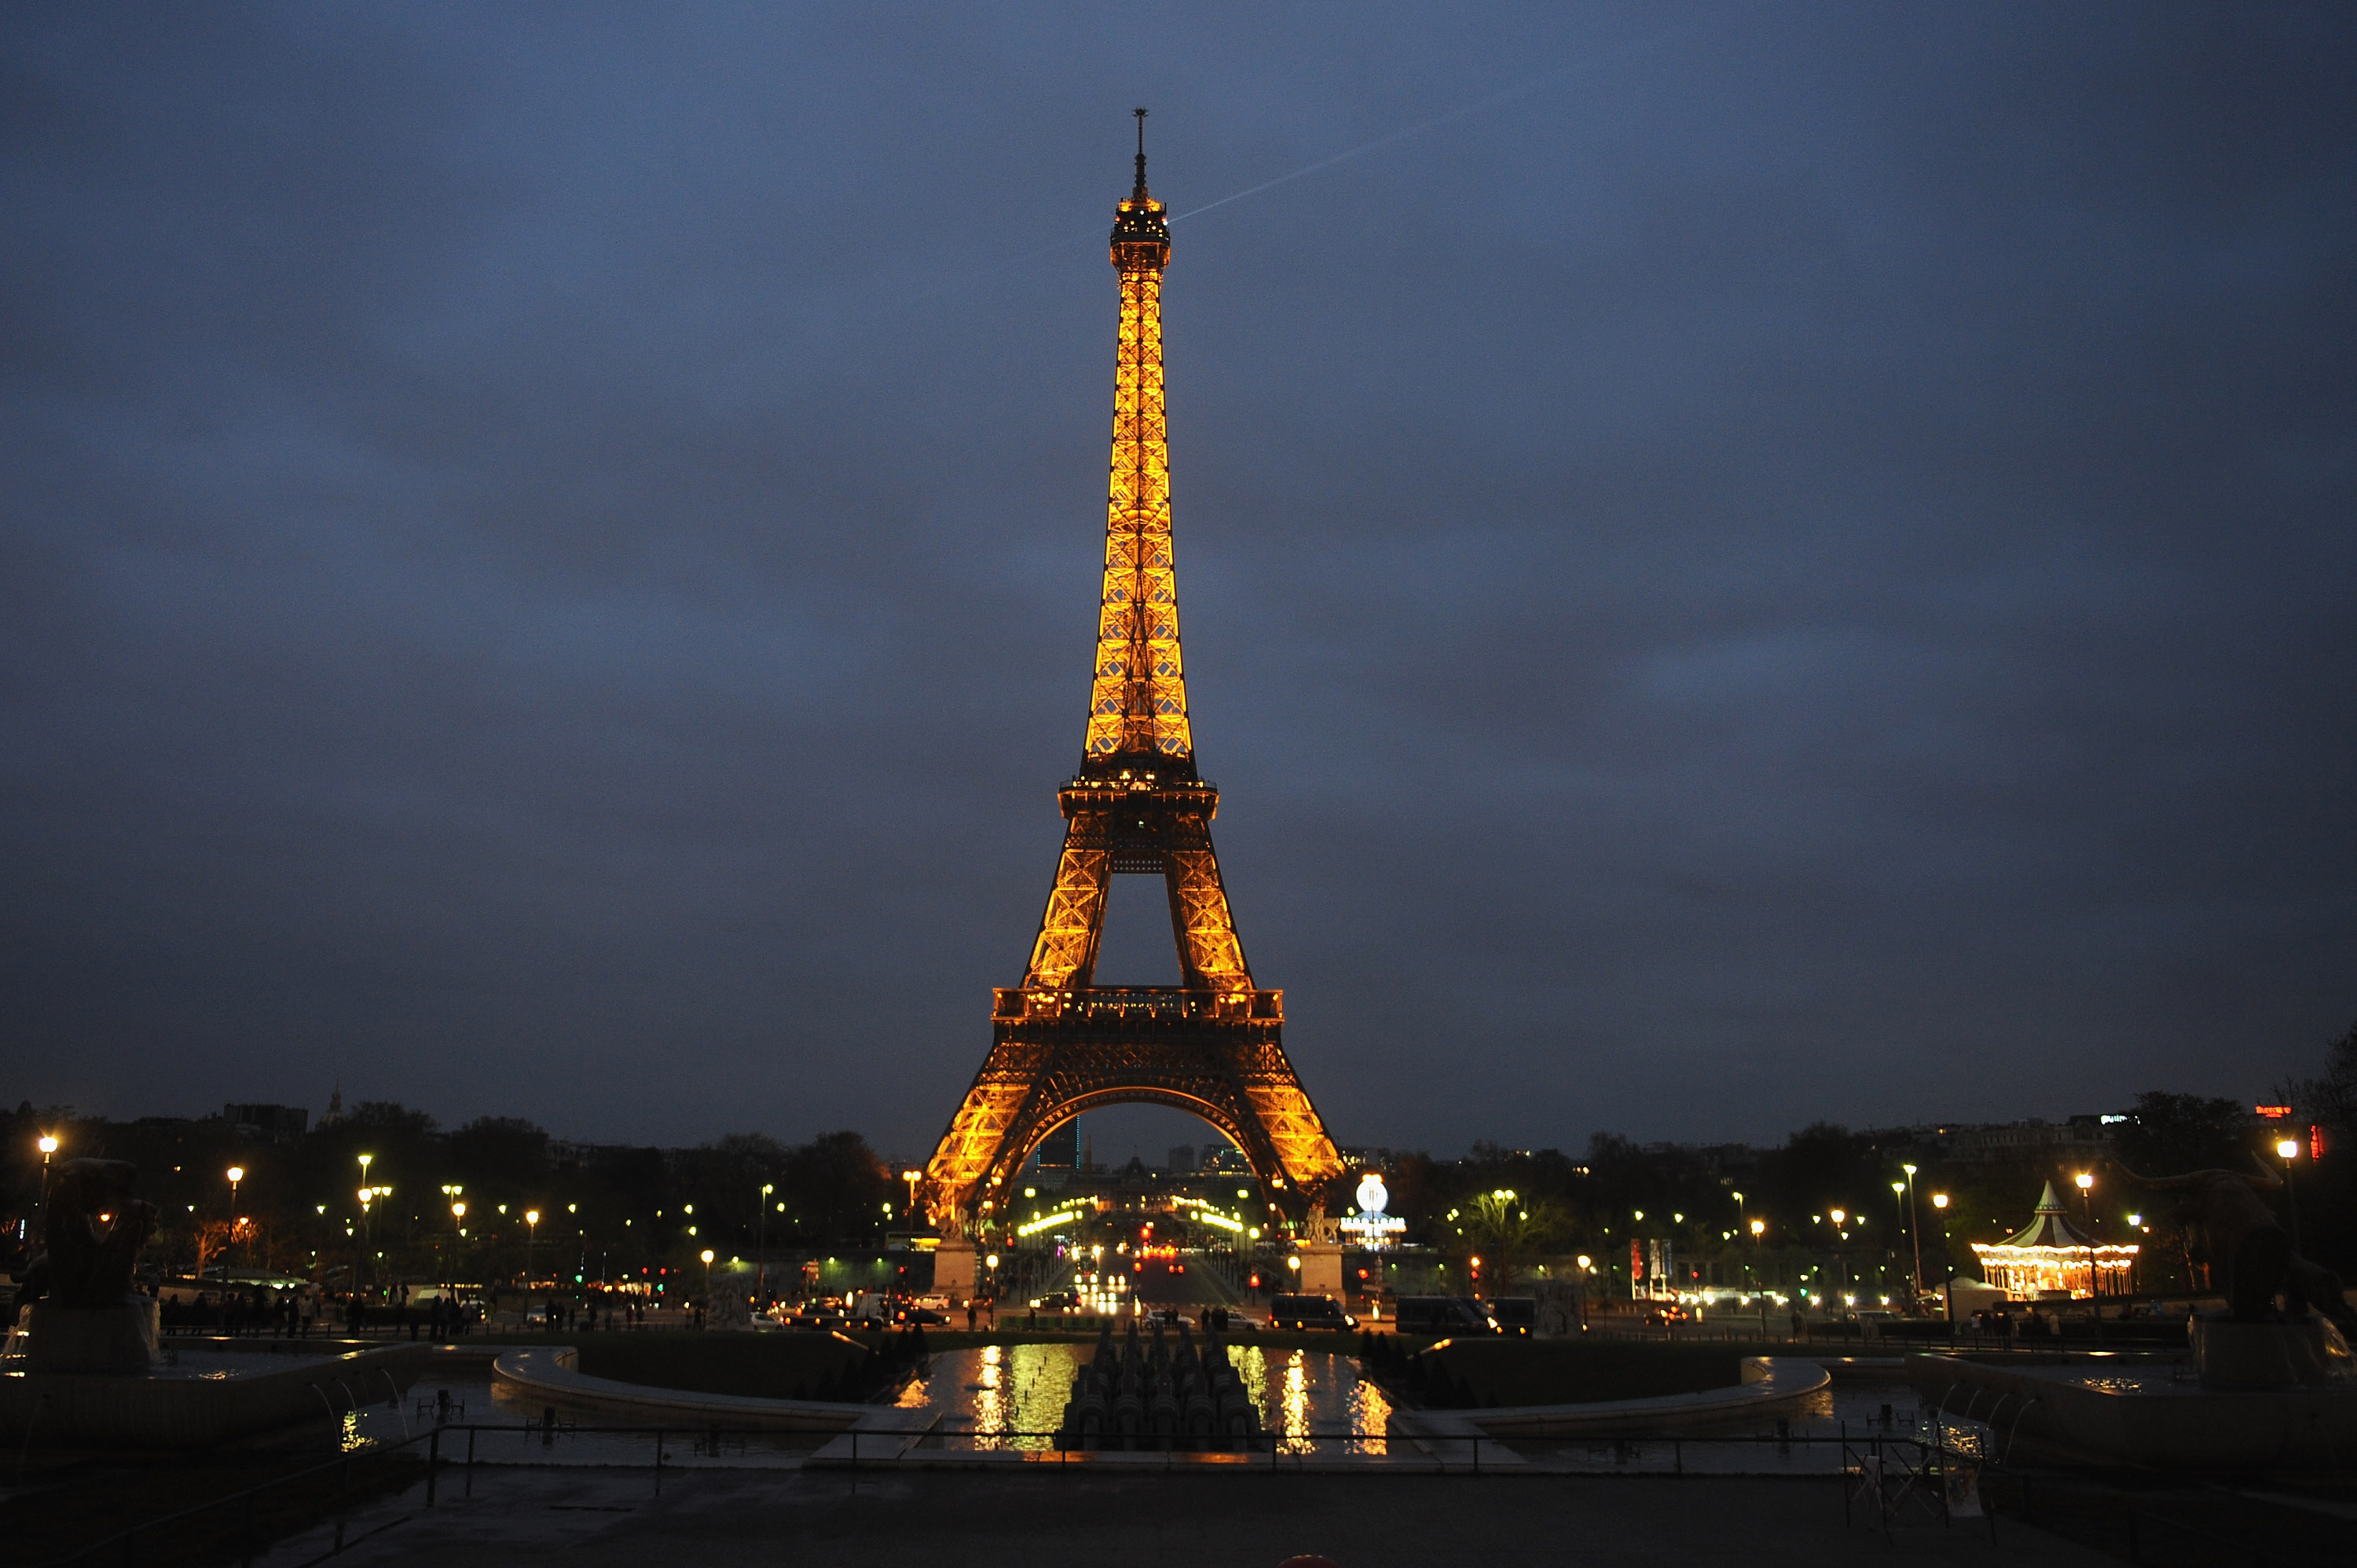 The Eiffel Tower is seen before the lights are switched off for Earth Hour 2012, on March 31, 2012 in Paris, France. (Antoine Antoniol—Getty Images)